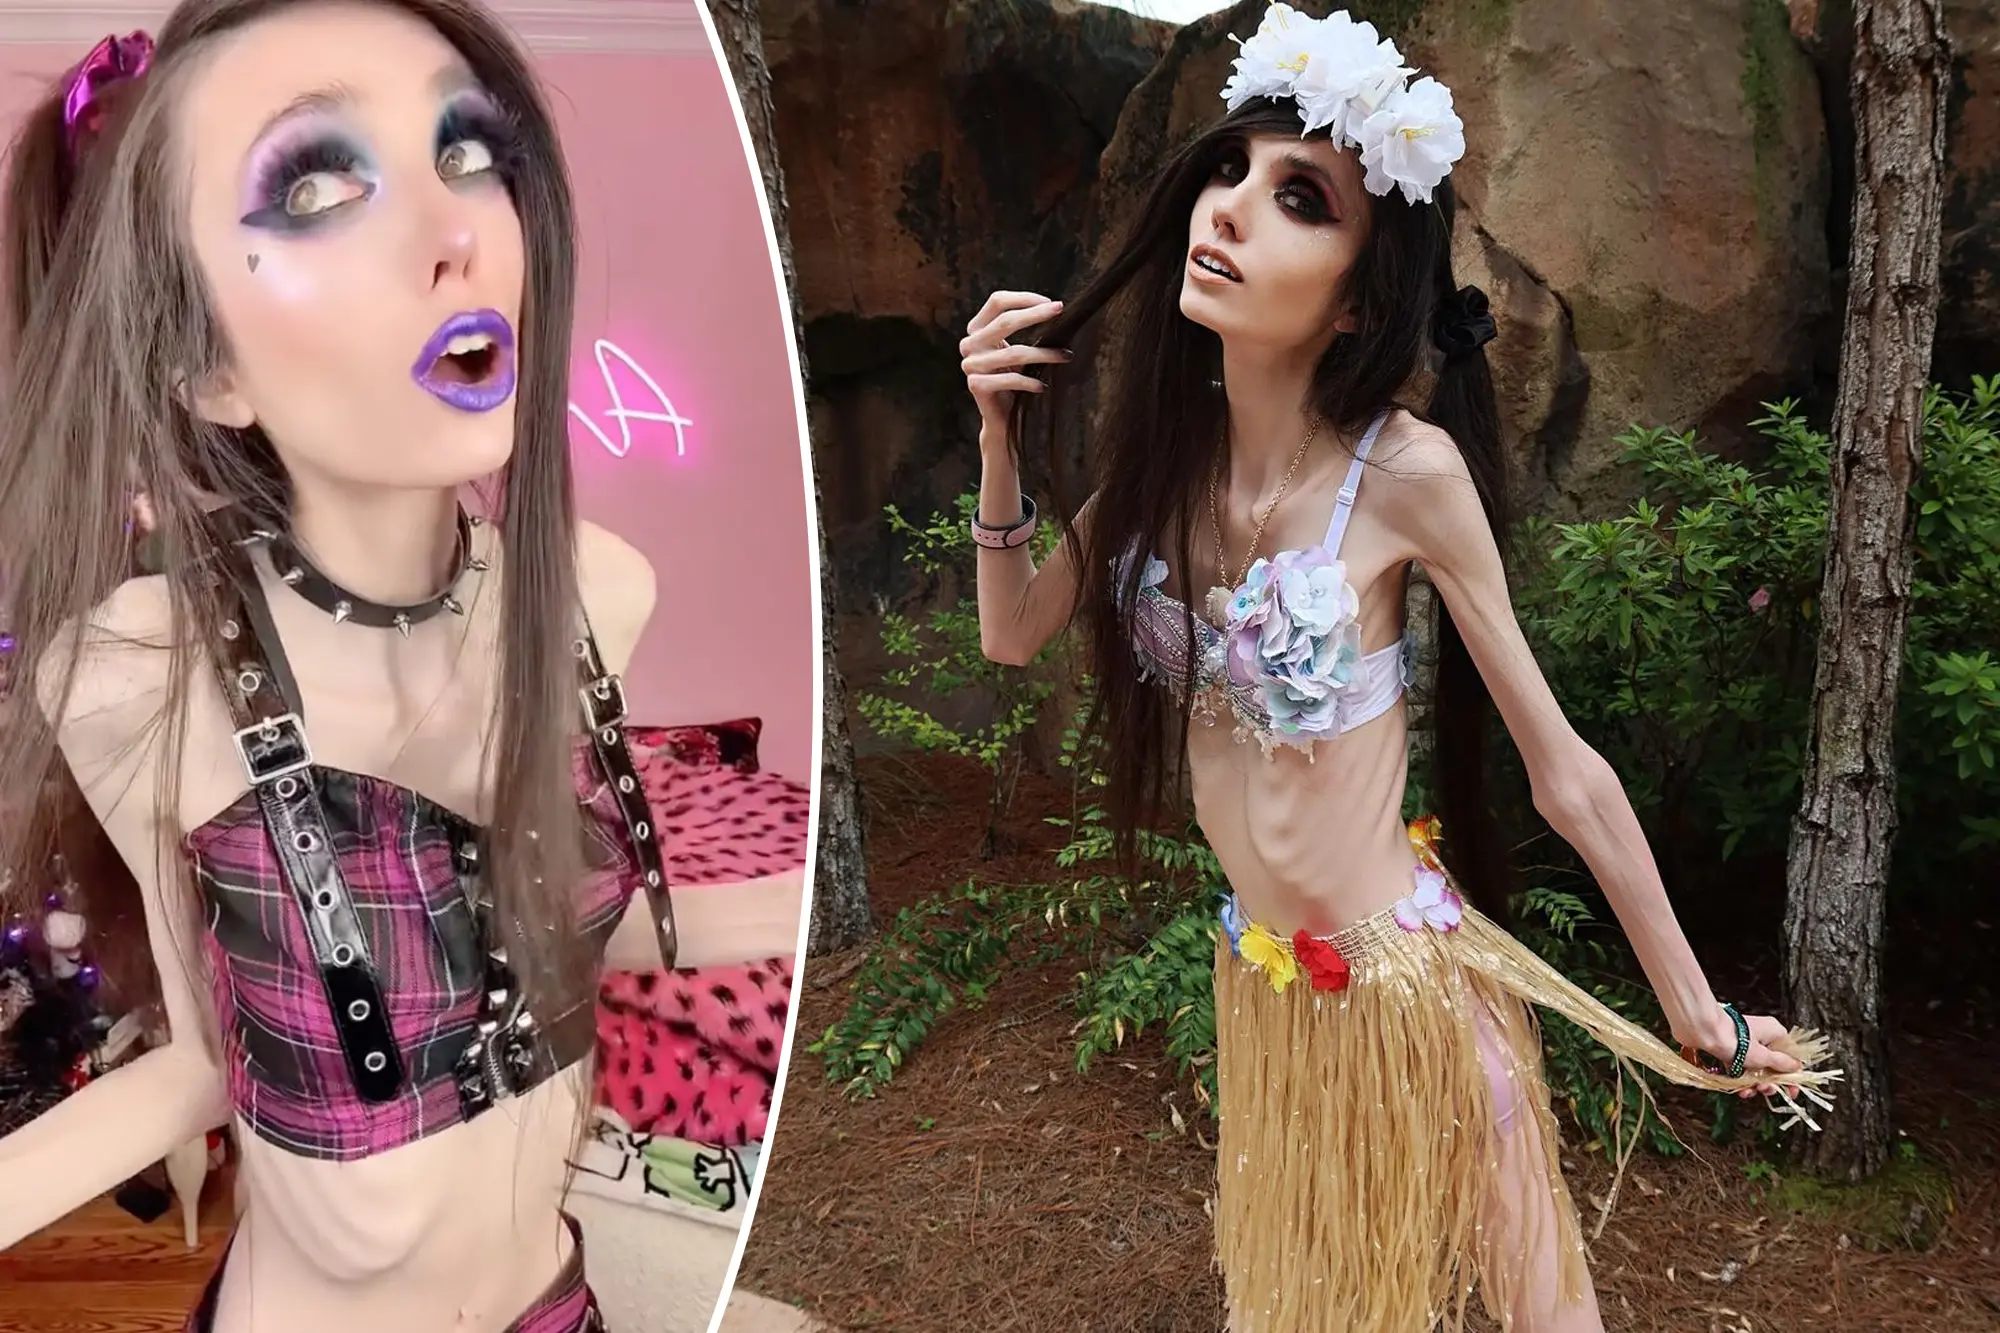 blogger-eugenia-cooney-faces-concerns-over-her-thin-appearance